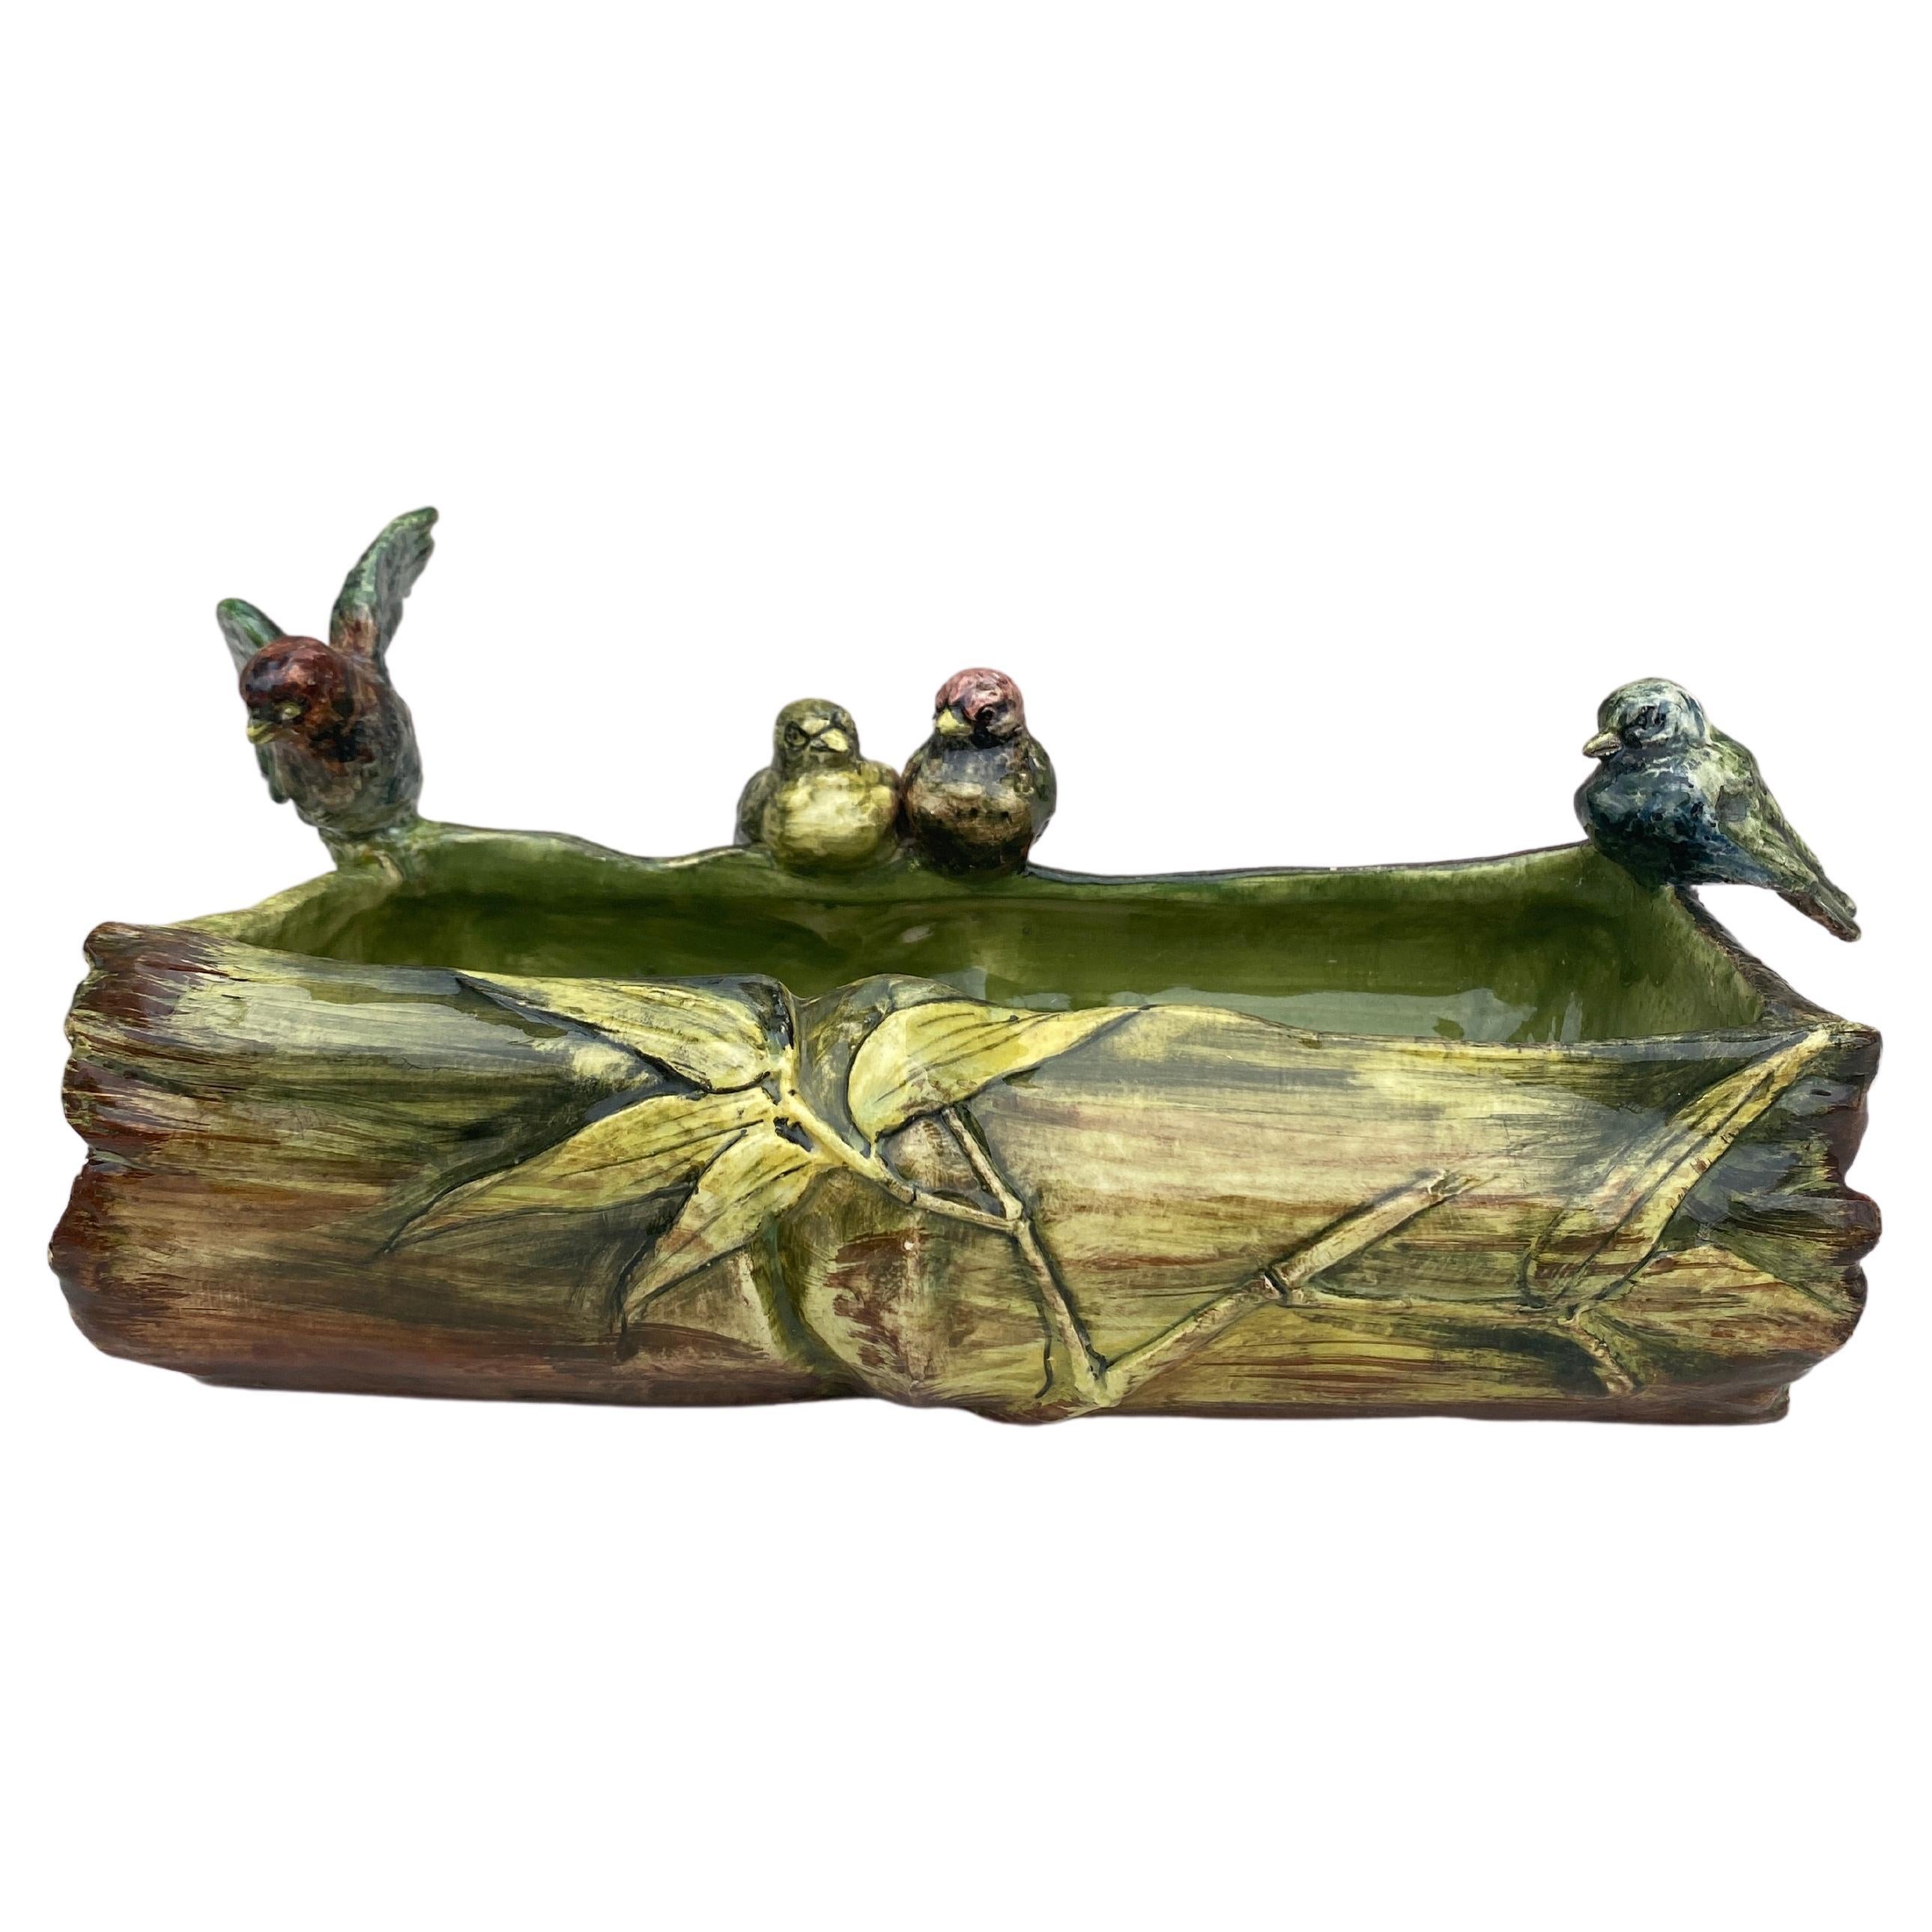 Antique Majolica birds jardinière with bamboo circa 1890, signed Clement Massier Golfe-Juan.
 